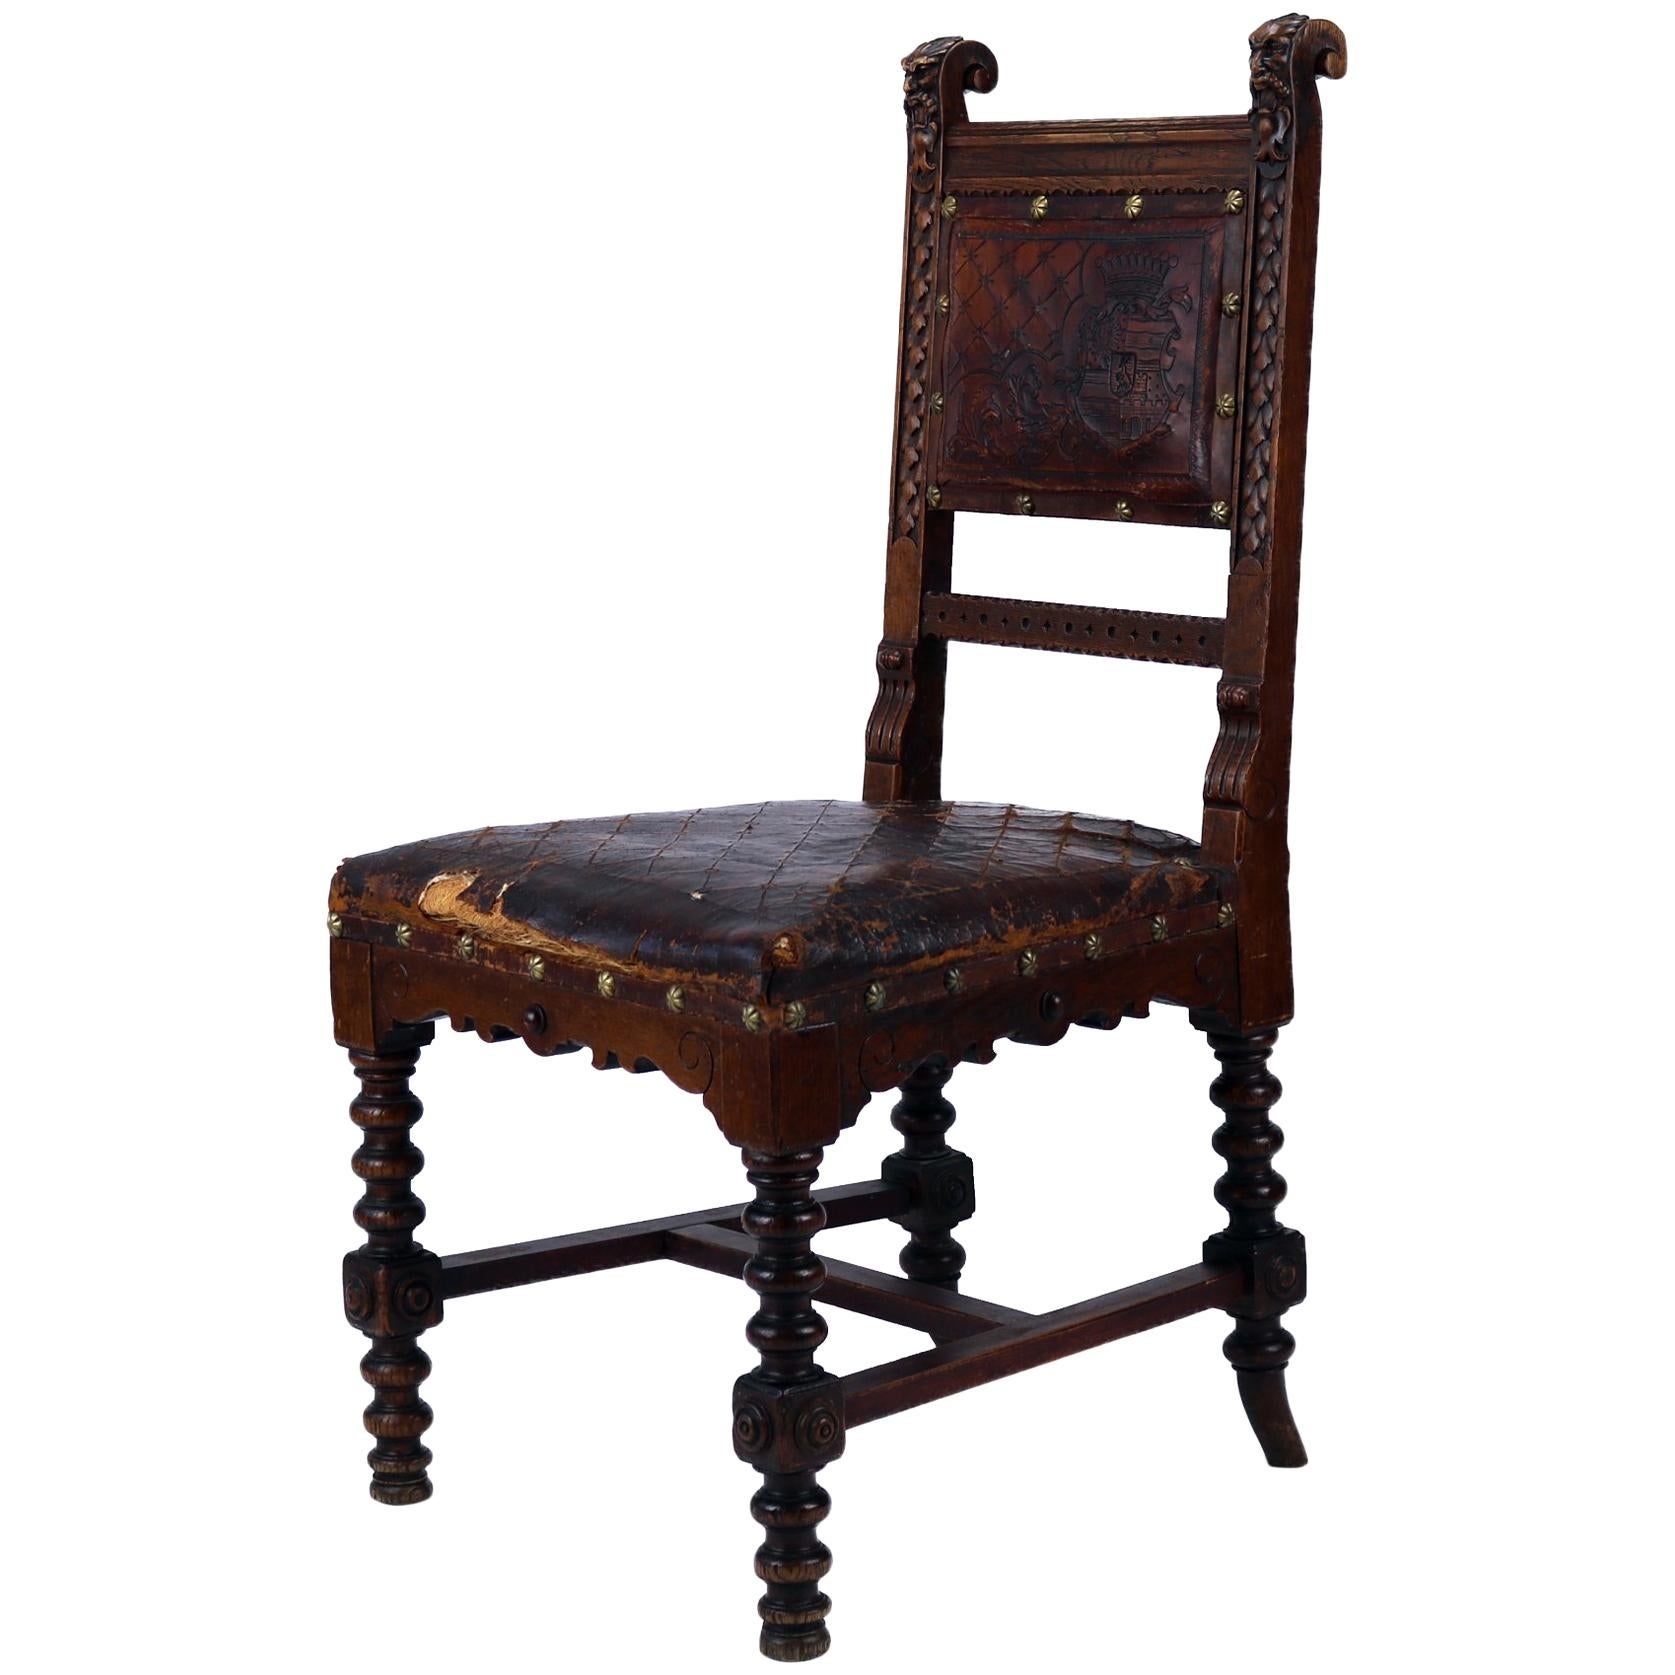 Reanaissance Revival Hand-Carved Chair with Embossed Leather 19th Century For Sale